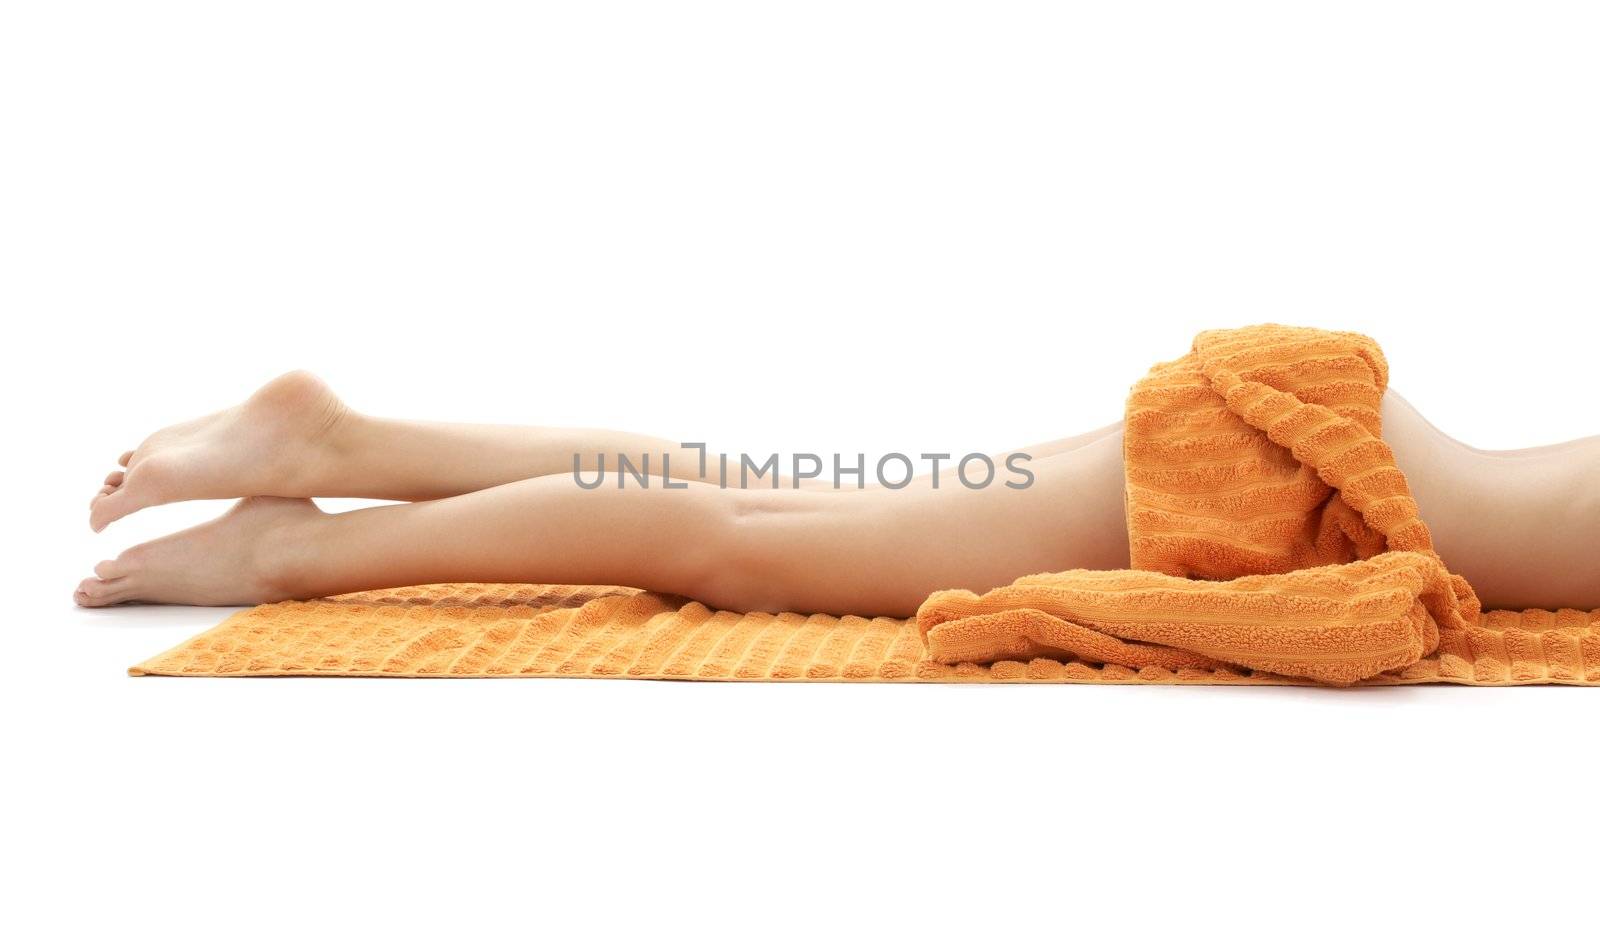 long legs of relaxed lady with orange towel #3 by dolgachov